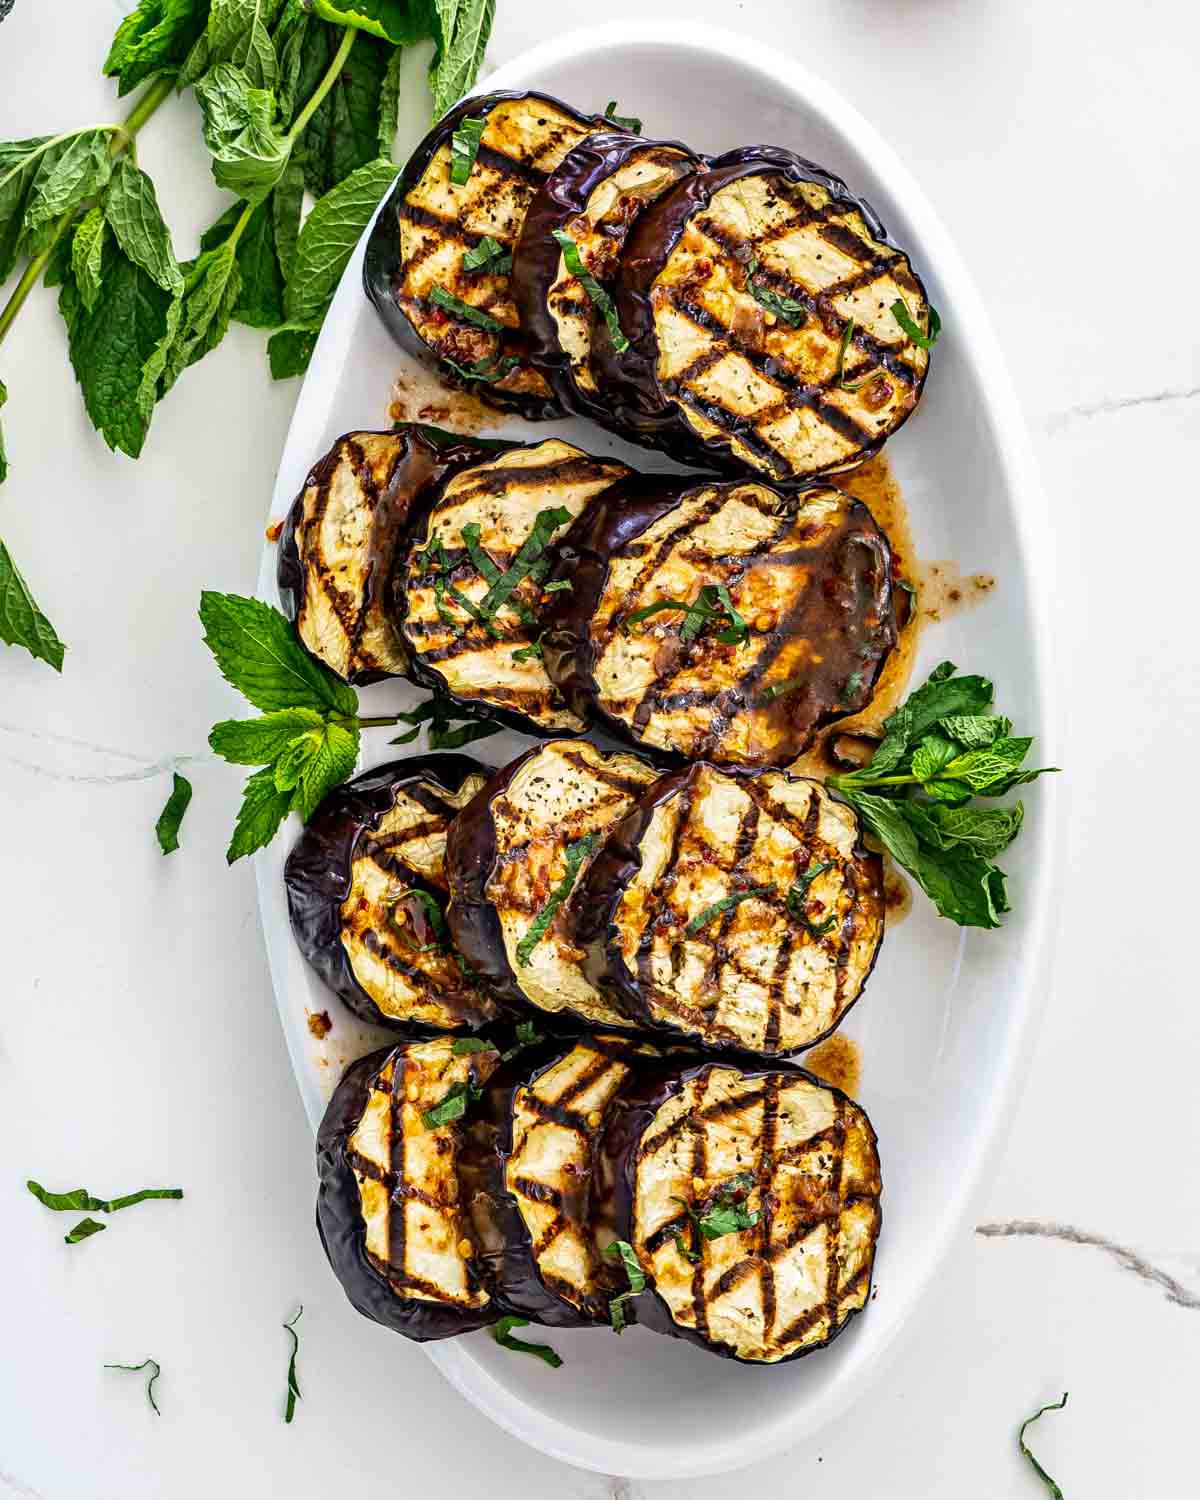 grilled eggplant with garlic mint sauce on a white platter.